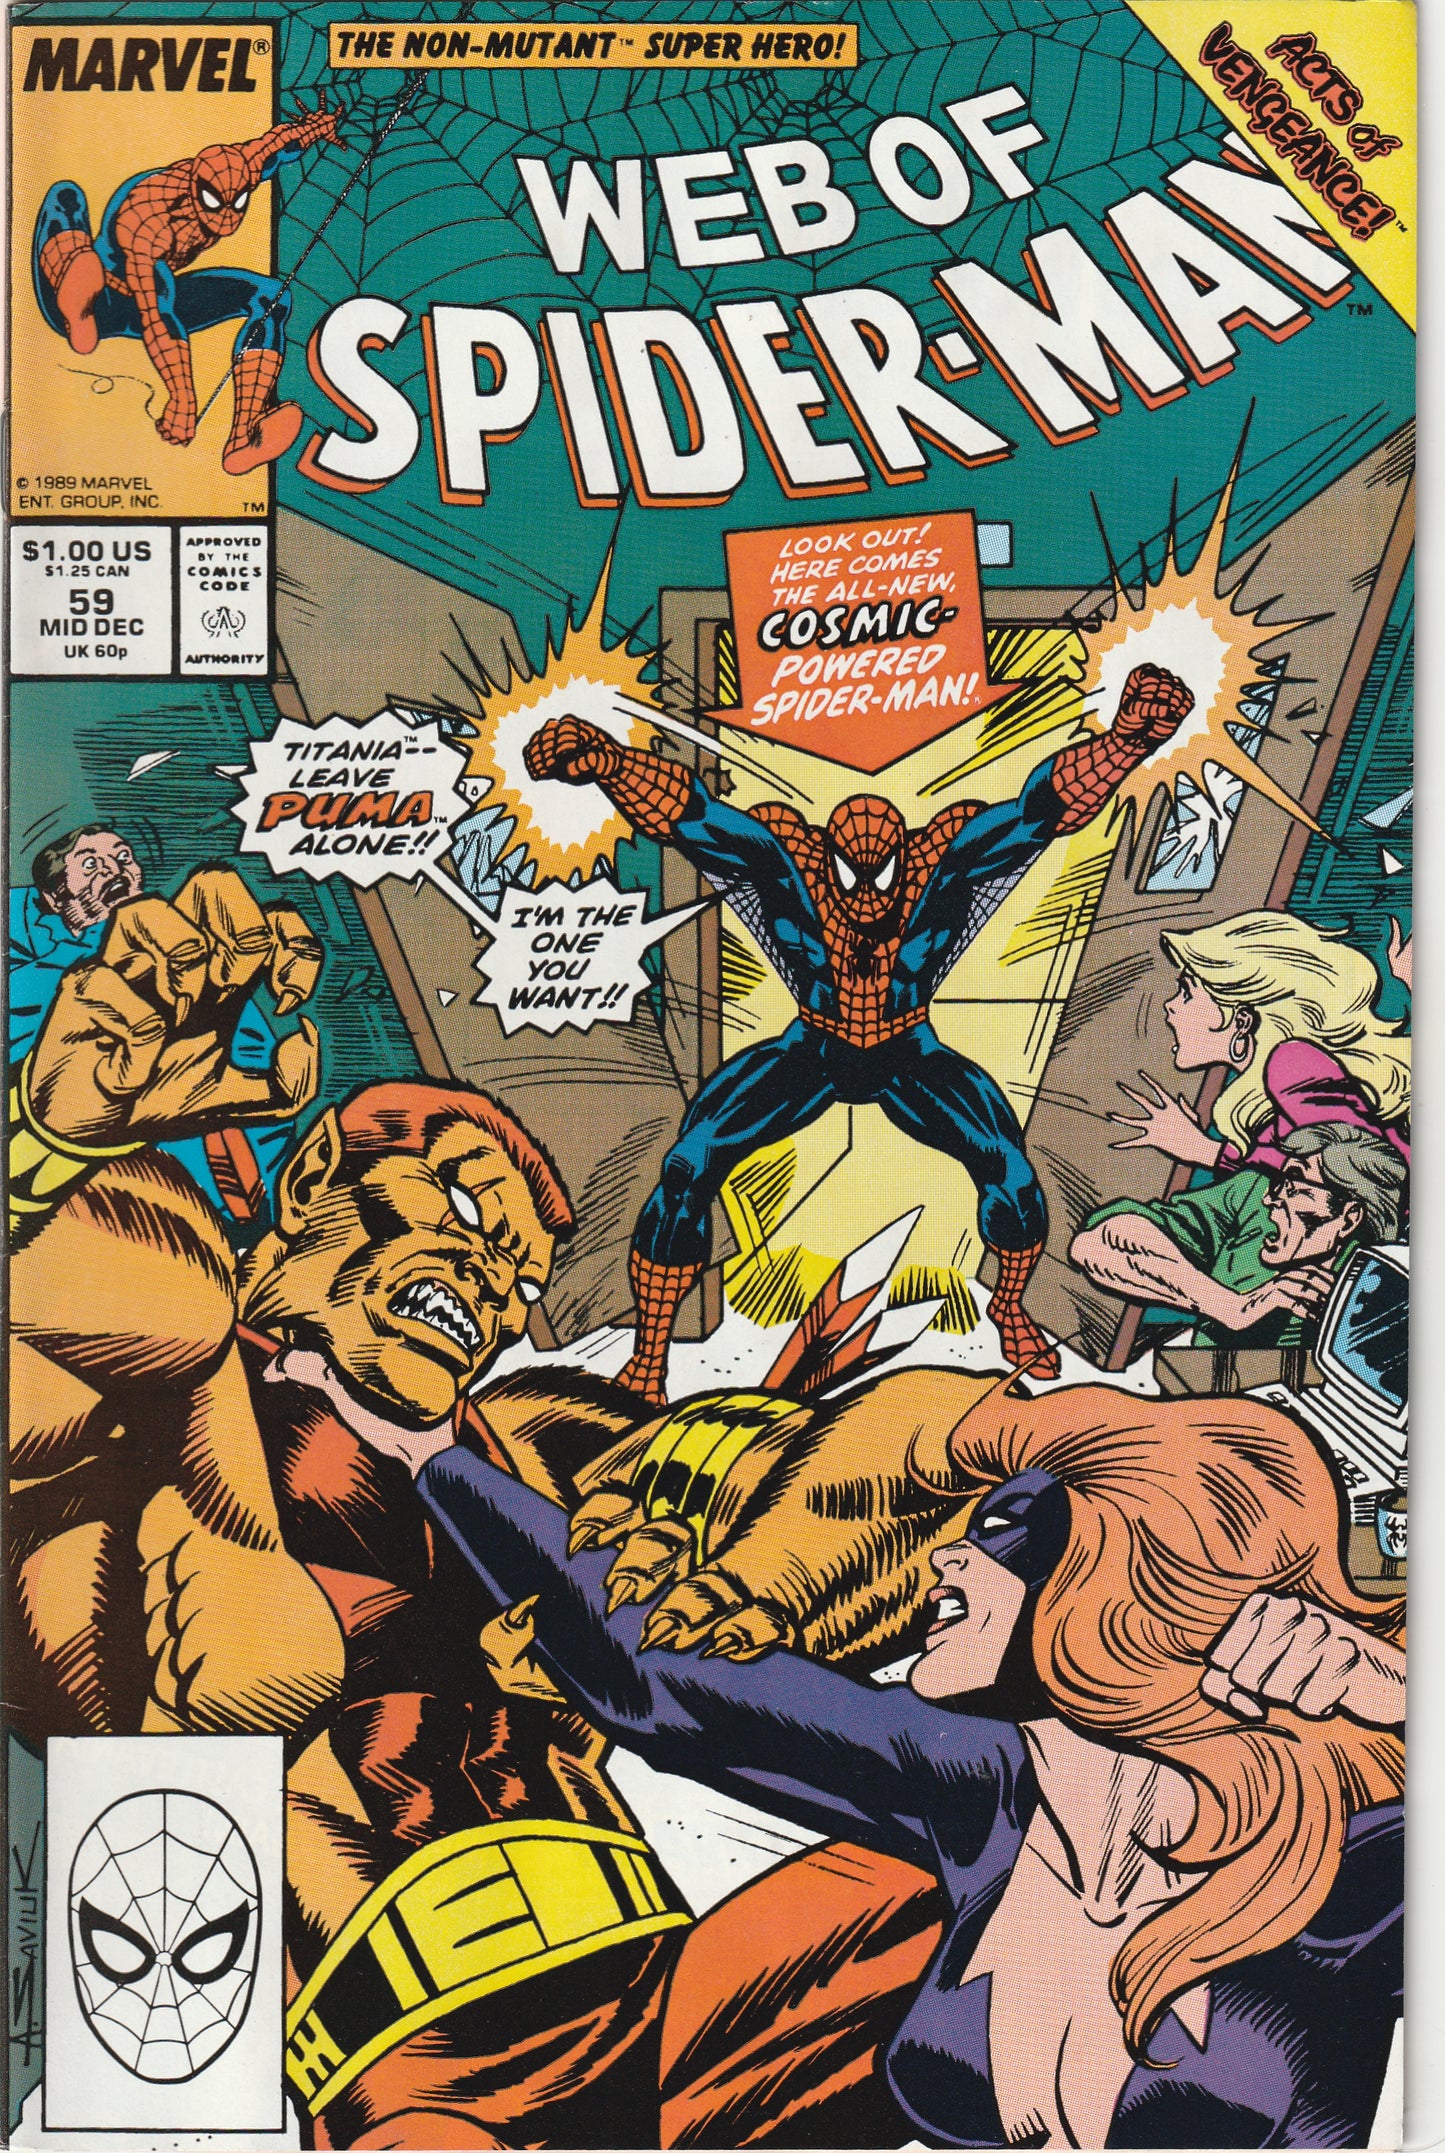 Web of Spider-Man #59 (1989) - Cosmic Spider-Man, Titania Appearance